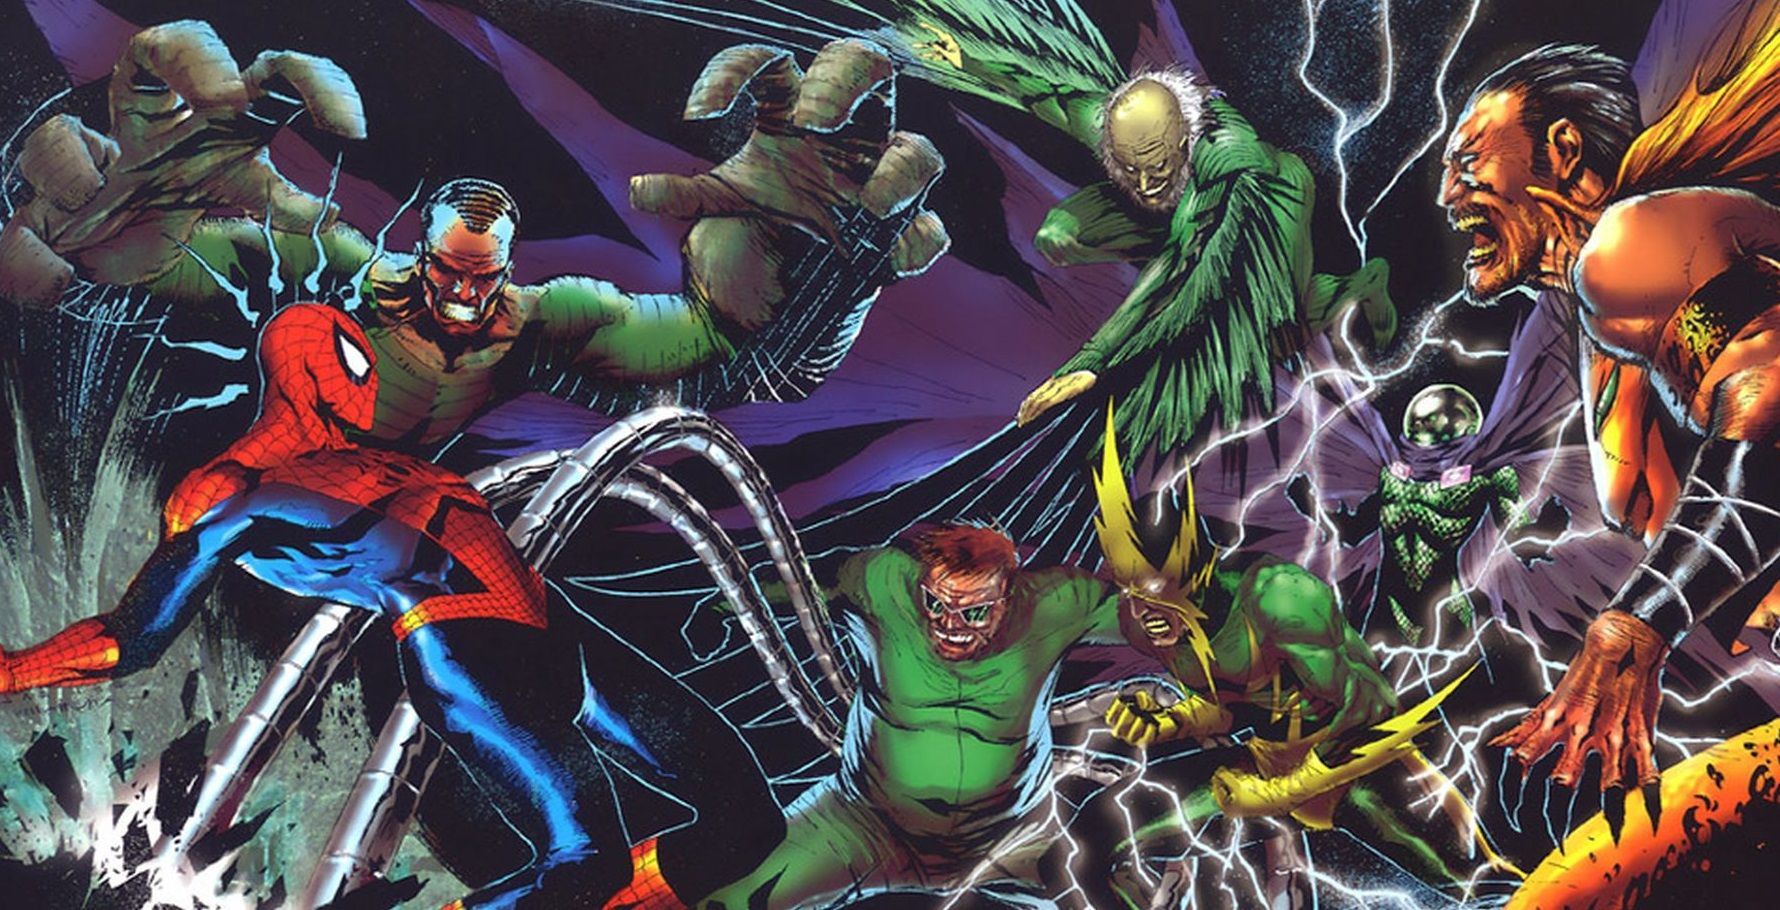 Spider-Man fighting the Sinister Six